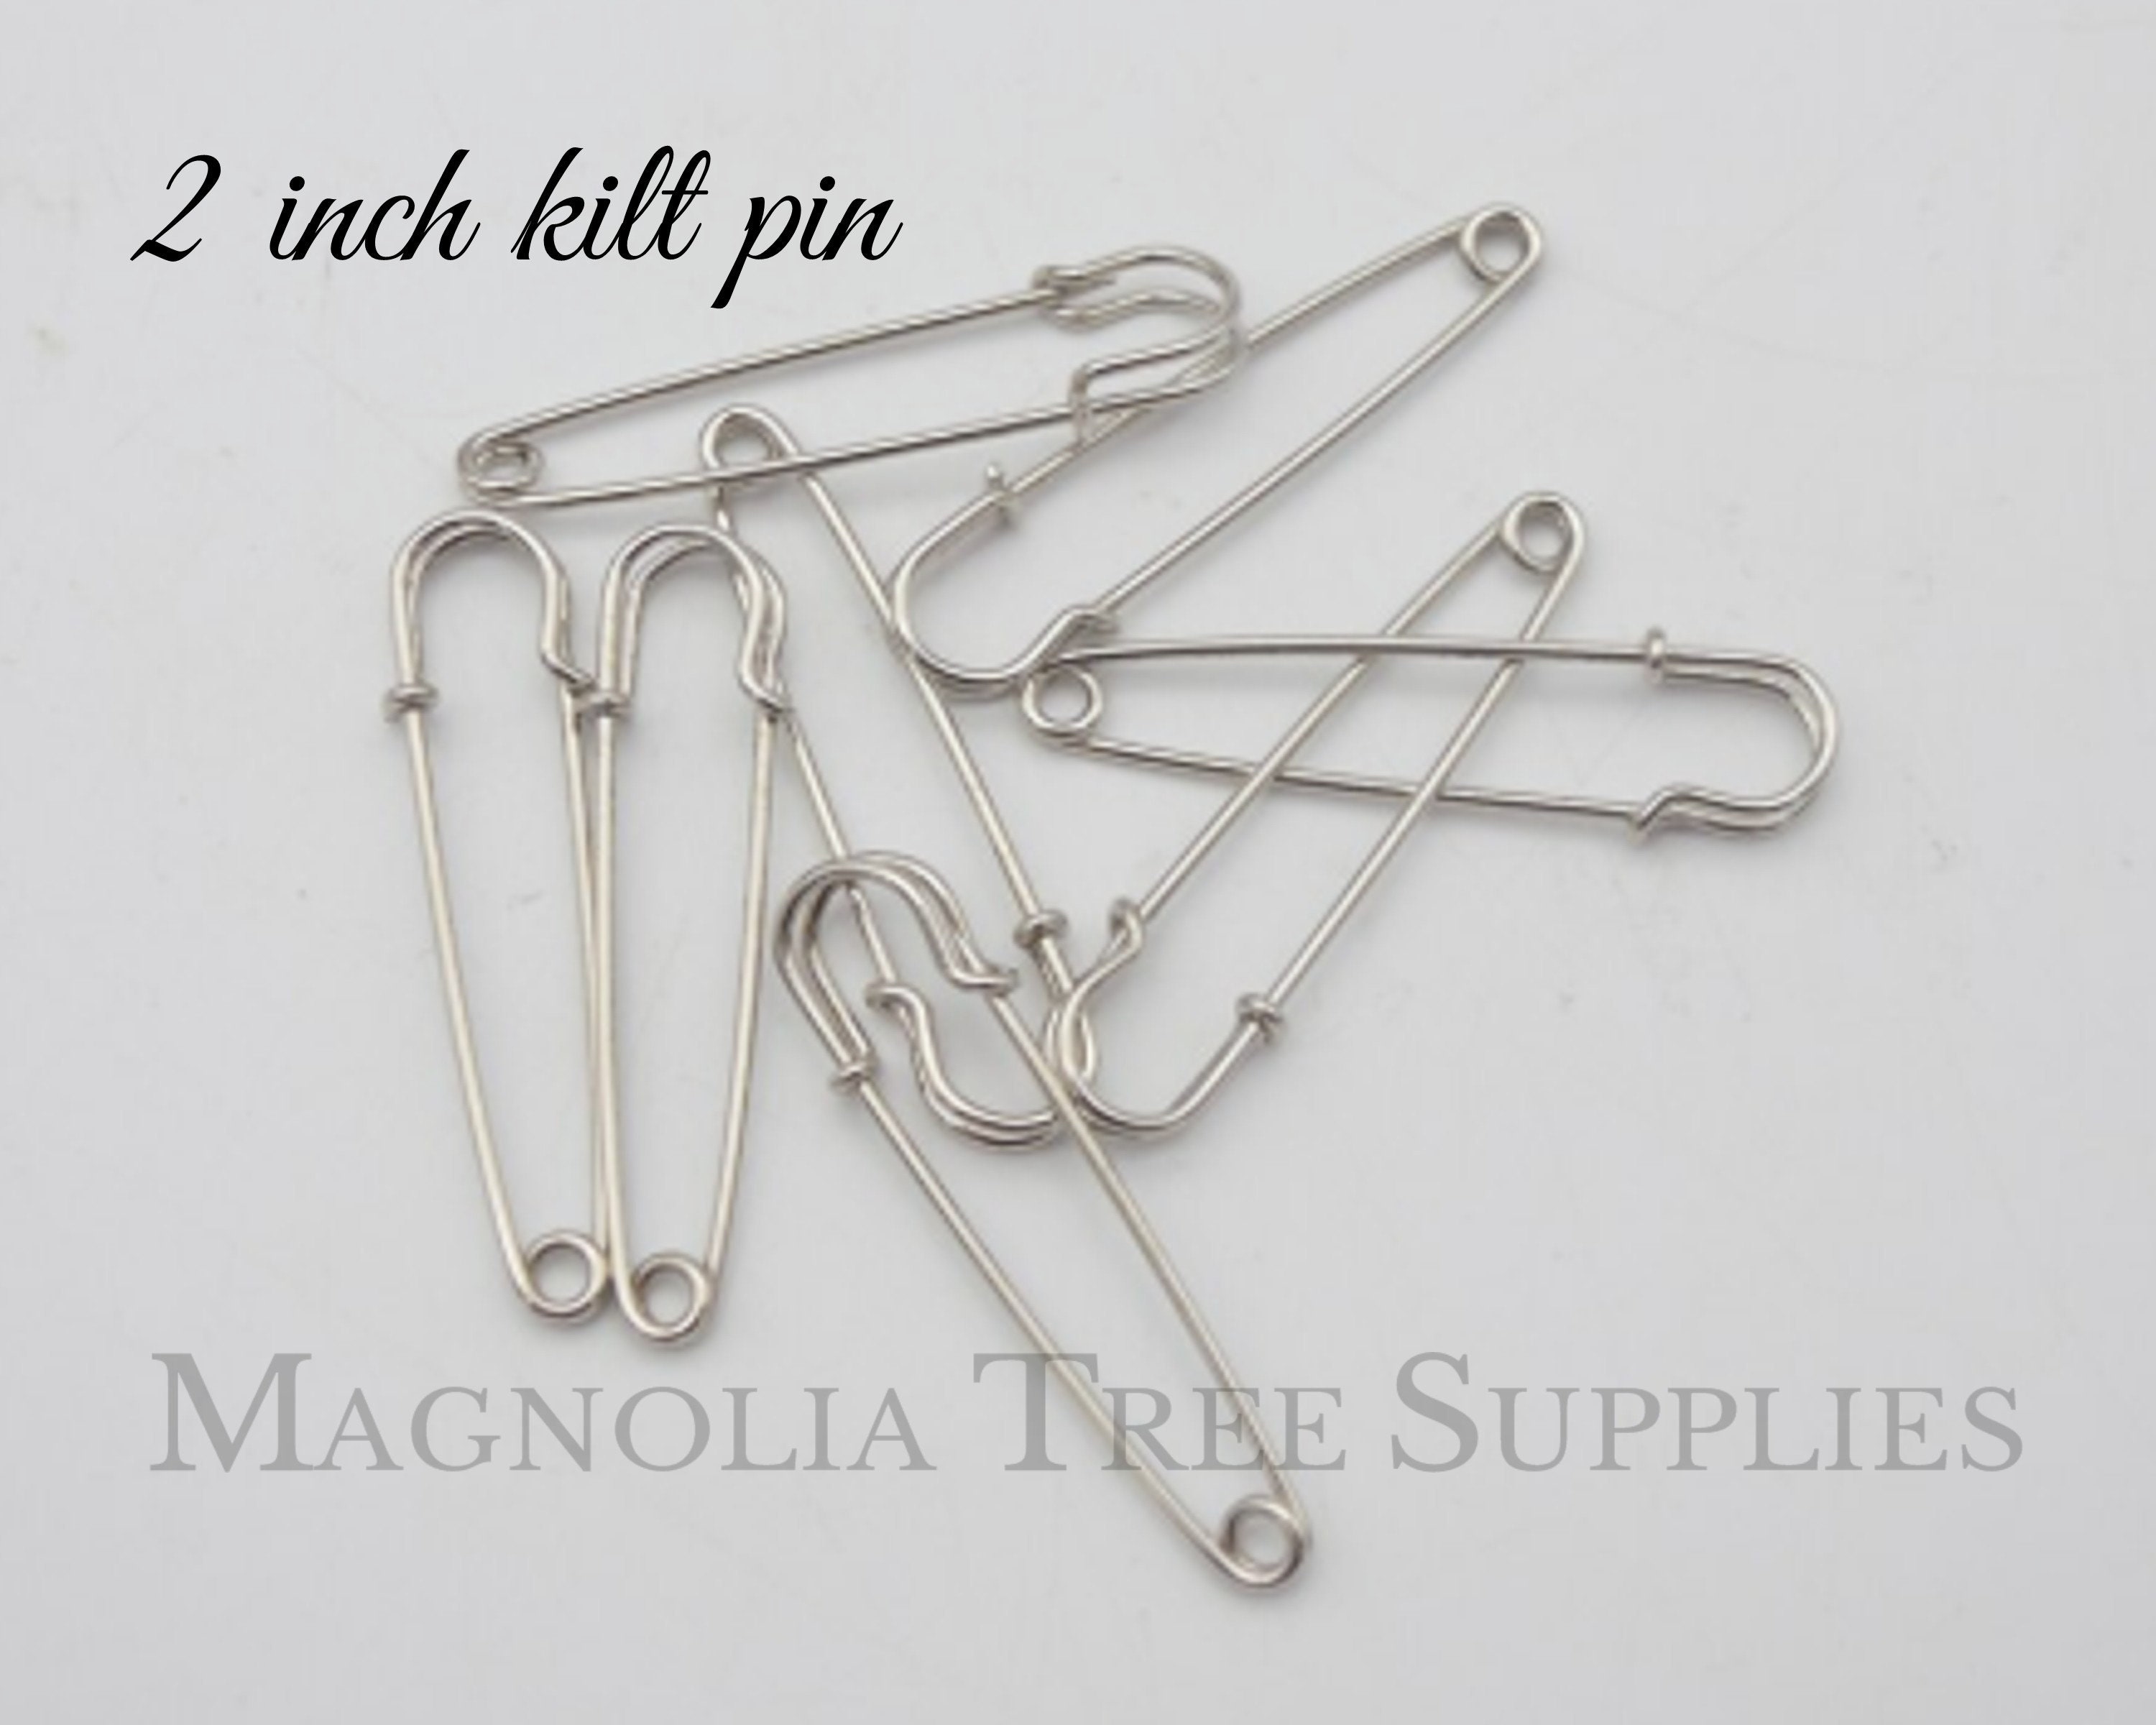 4 Large Safety Pin Heavy Duty Safety Pins - Jumbo Blanket Horse Pin Brooch  Decorative Pins Charms for Laundry Blankets Kilts Upholstery Crafts 4PCS